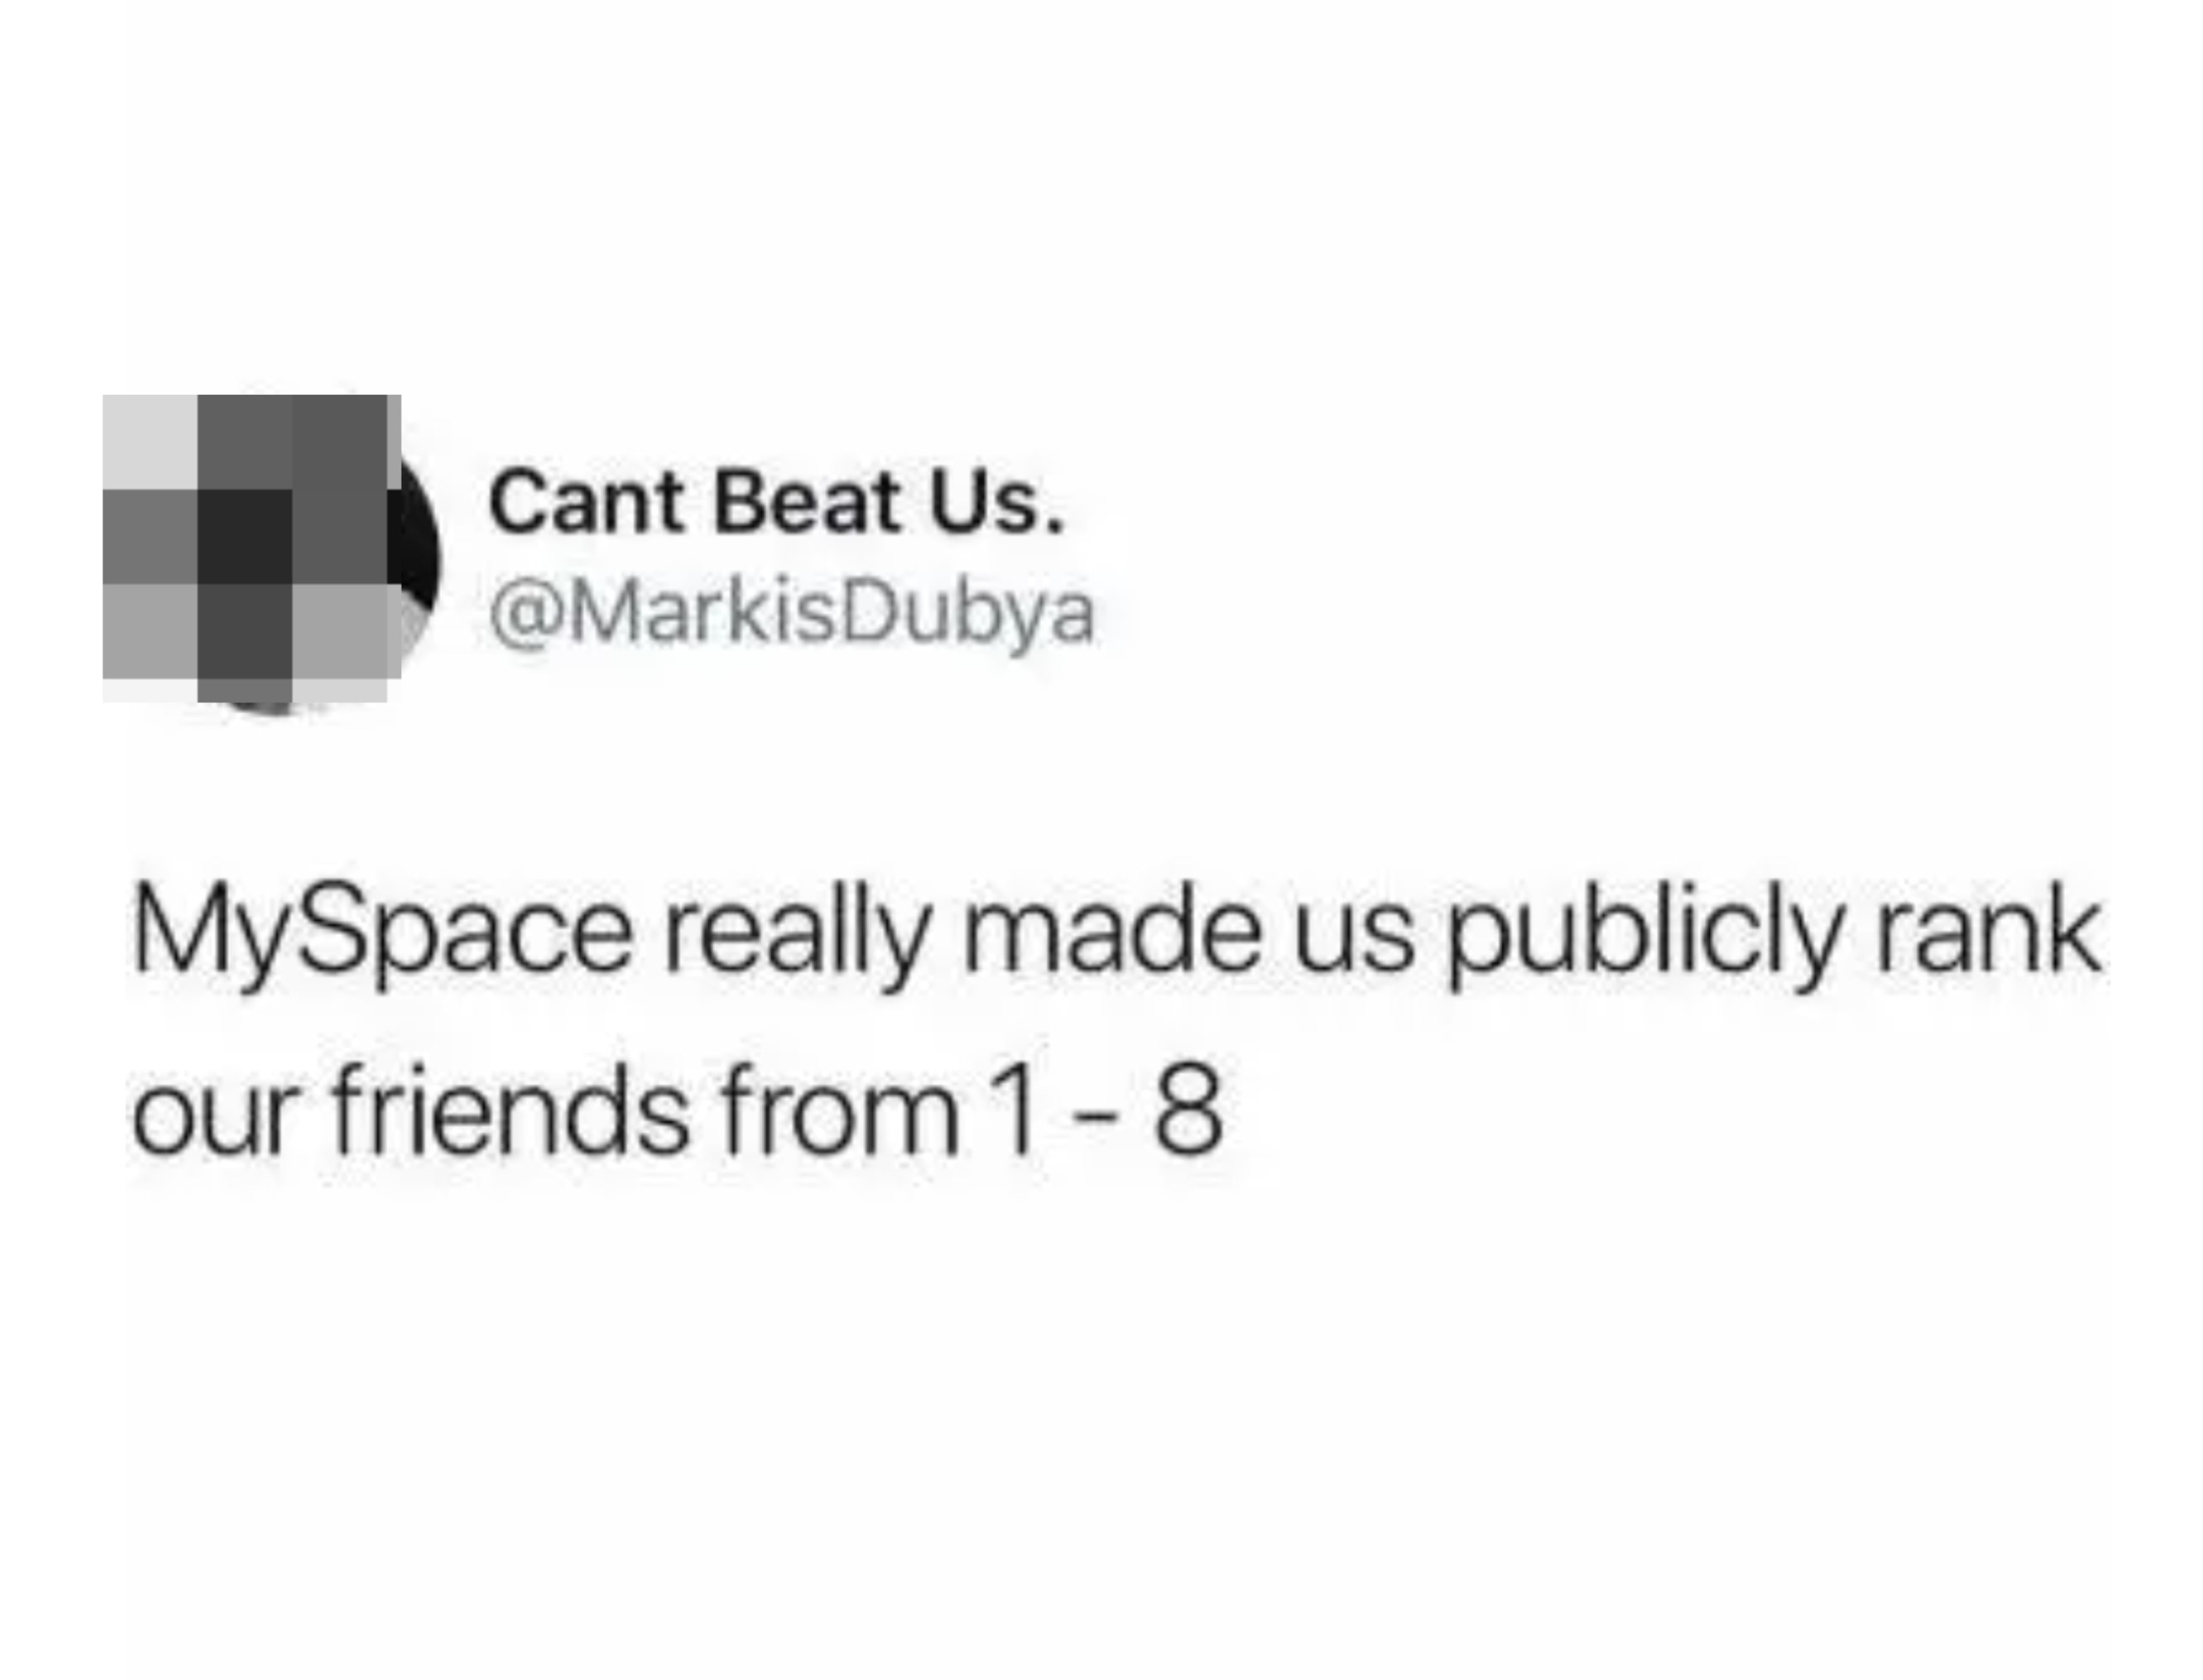 tweet reading myspace really made us rank our friends 1-8